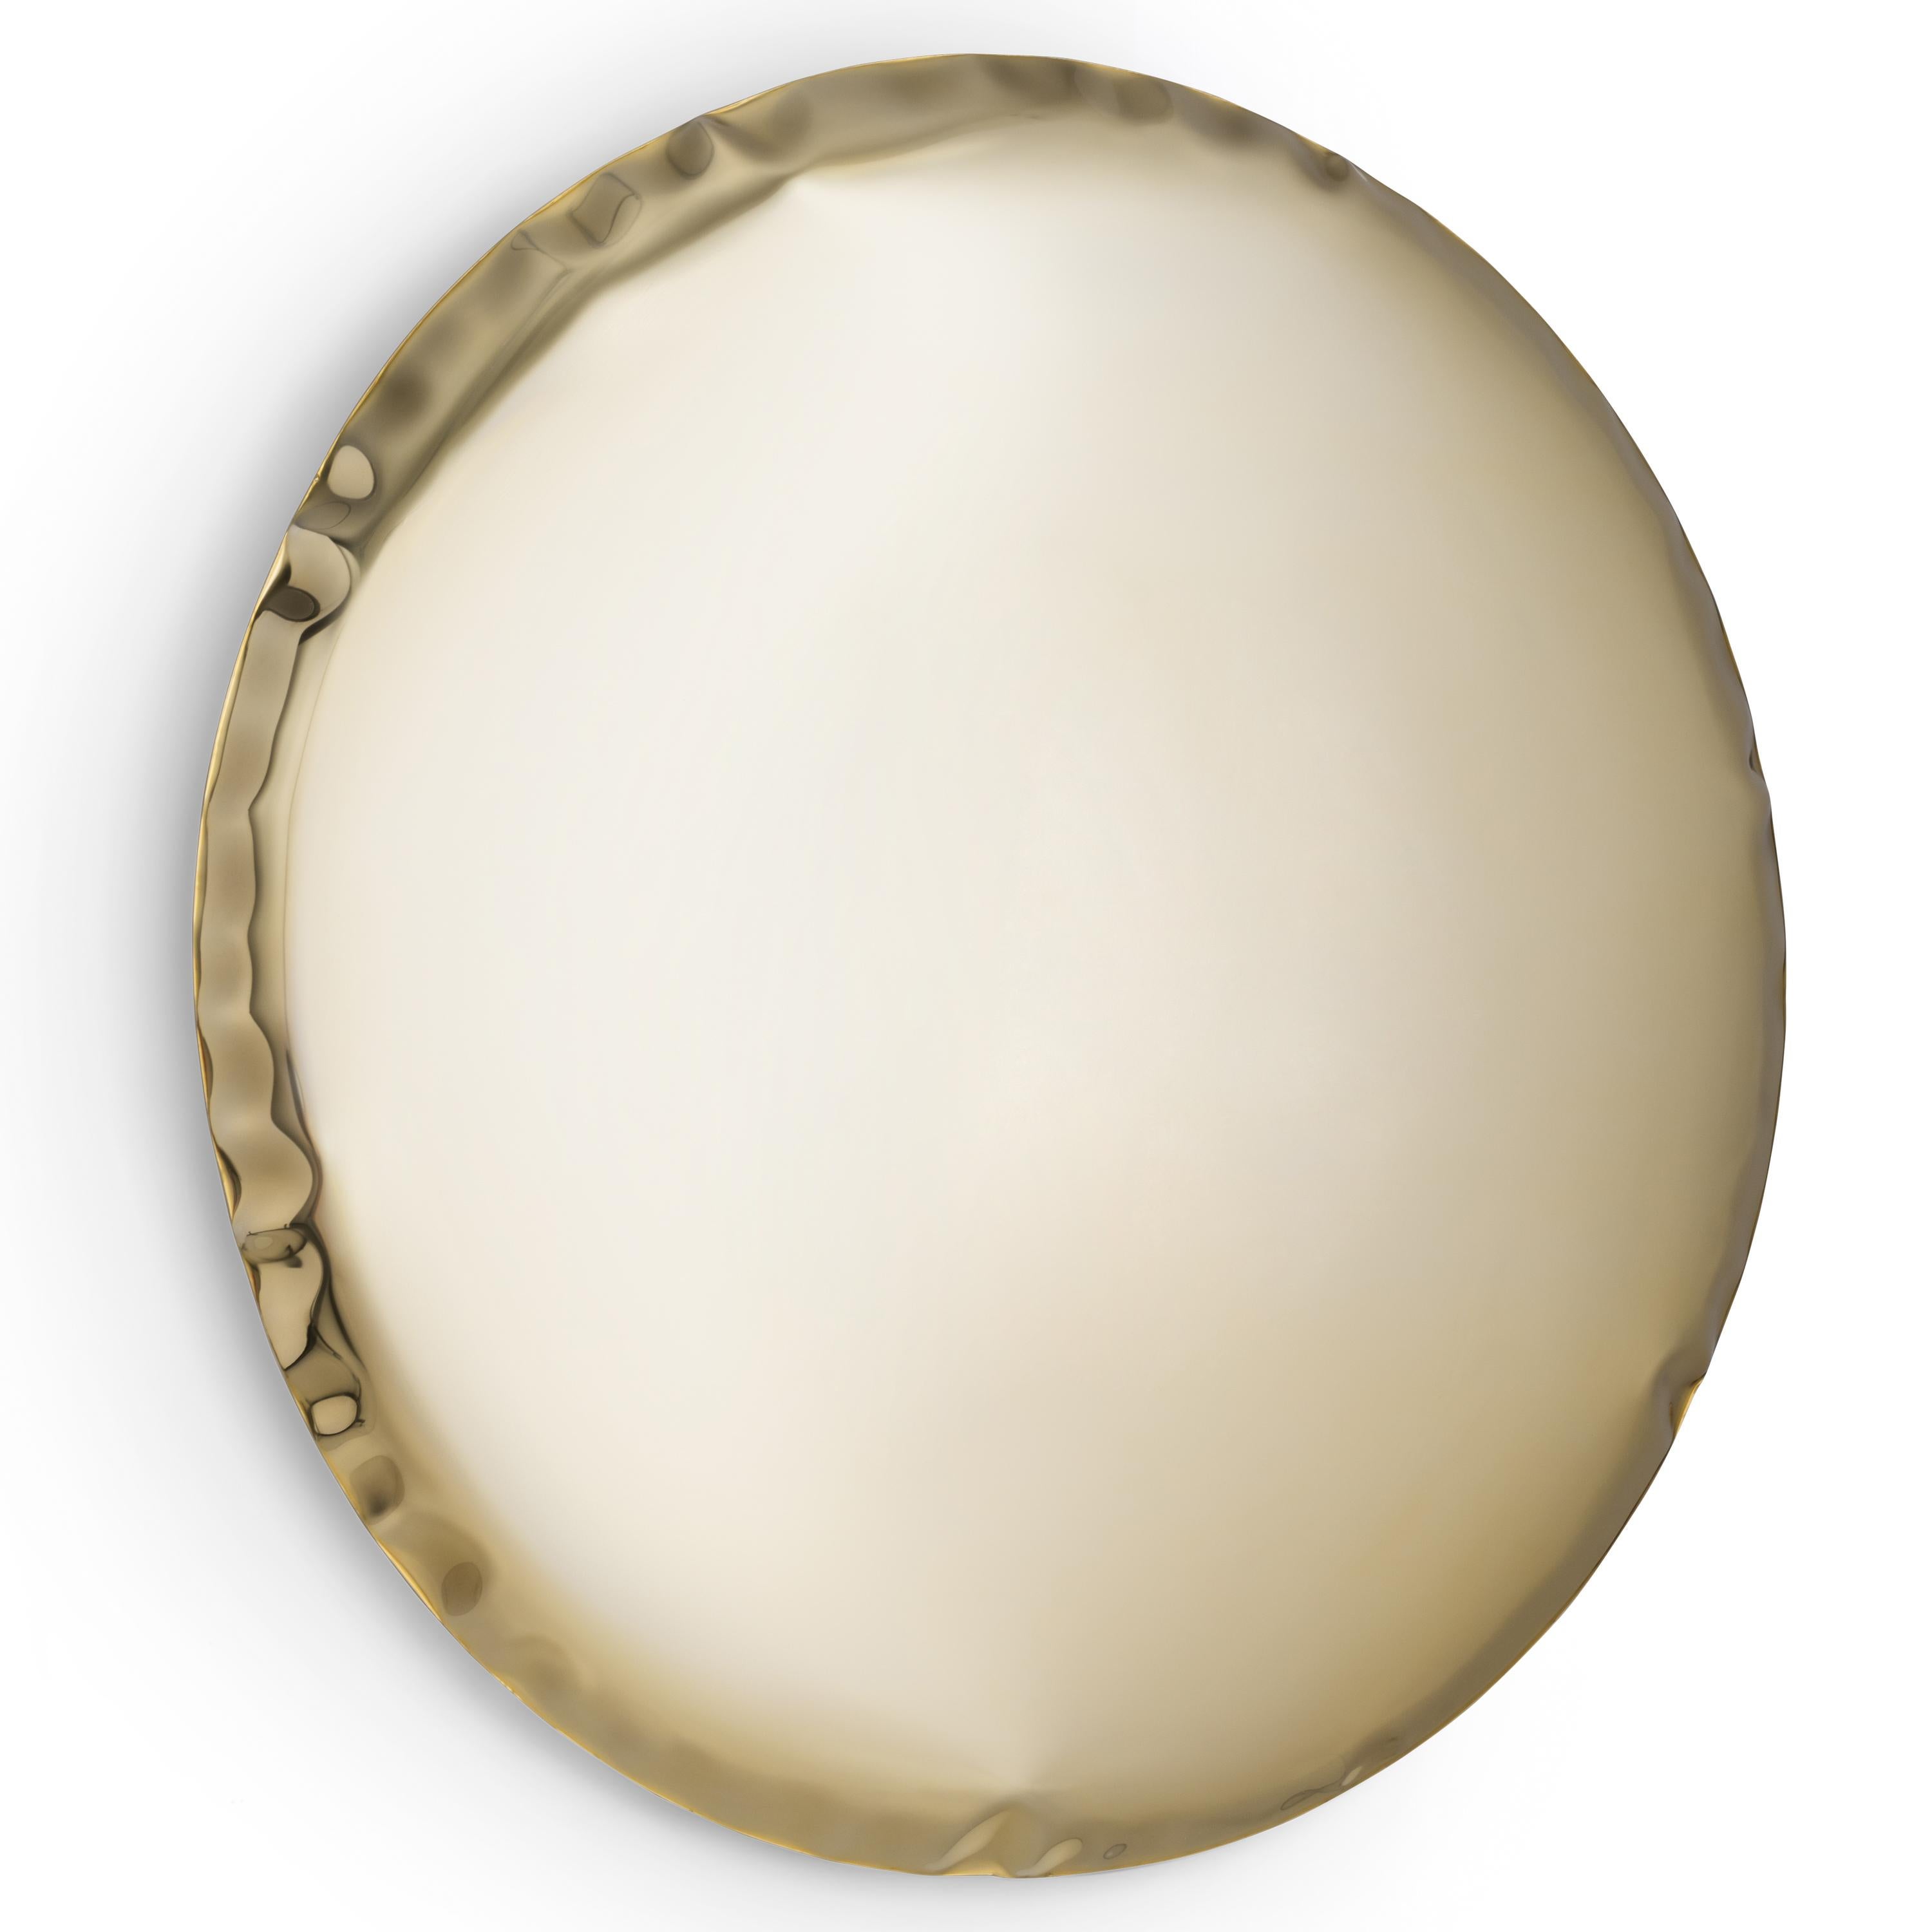 Polish Contemporary Mirror 'OKO 150', AURUM Collection, Light Gold, by Zieta For Sale